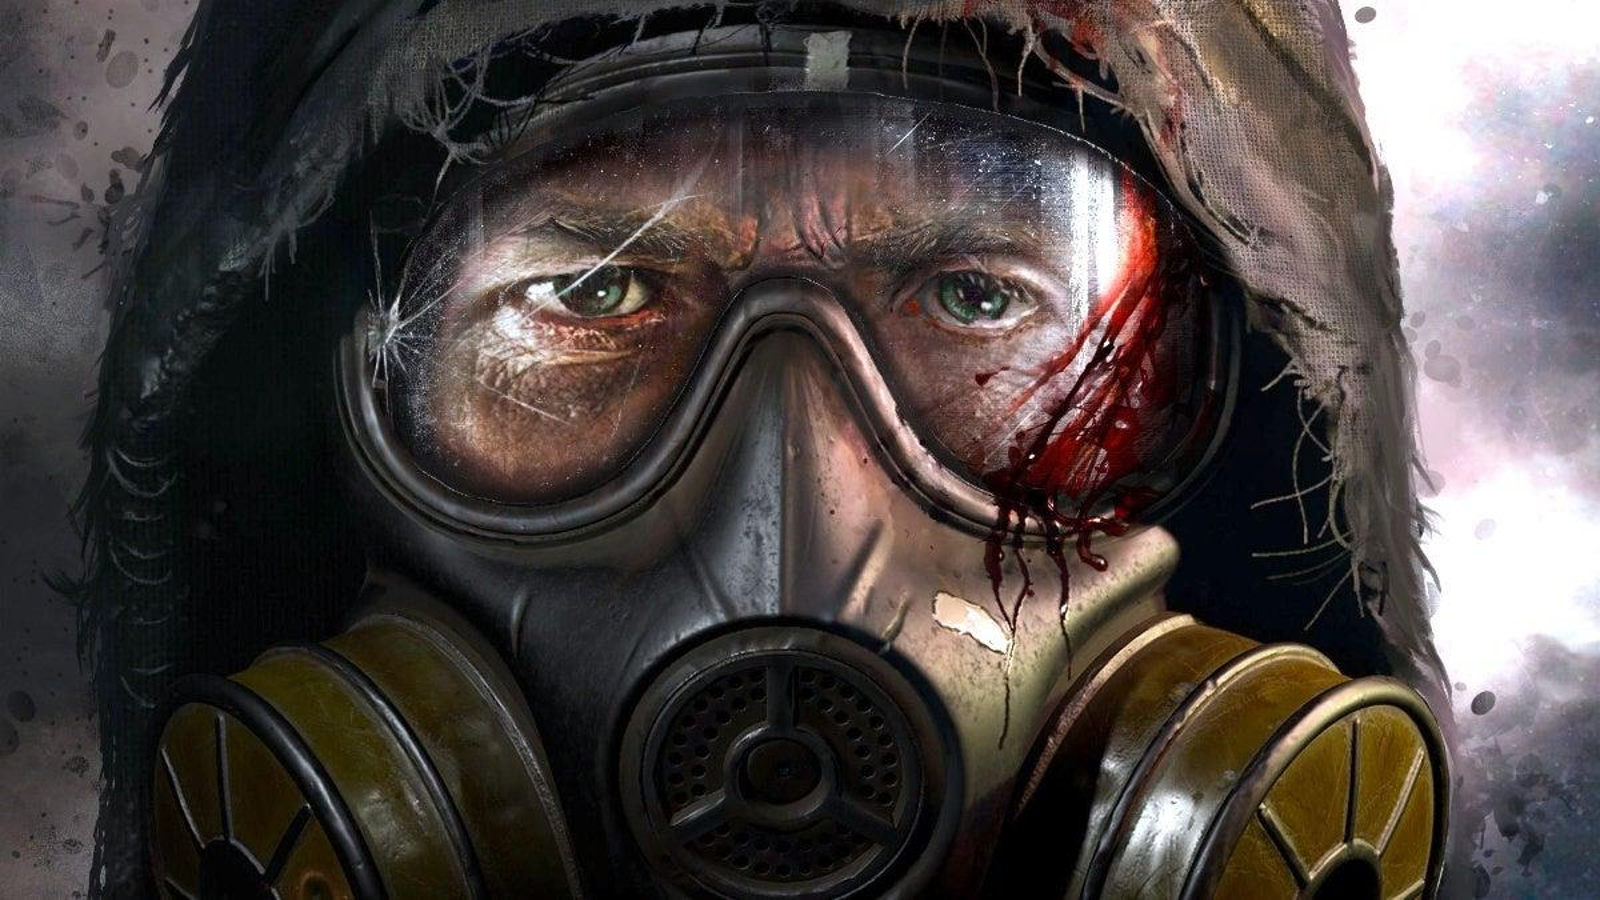 S.T.A.L.K.E.R. 2's release has understandably been pushed to 2023